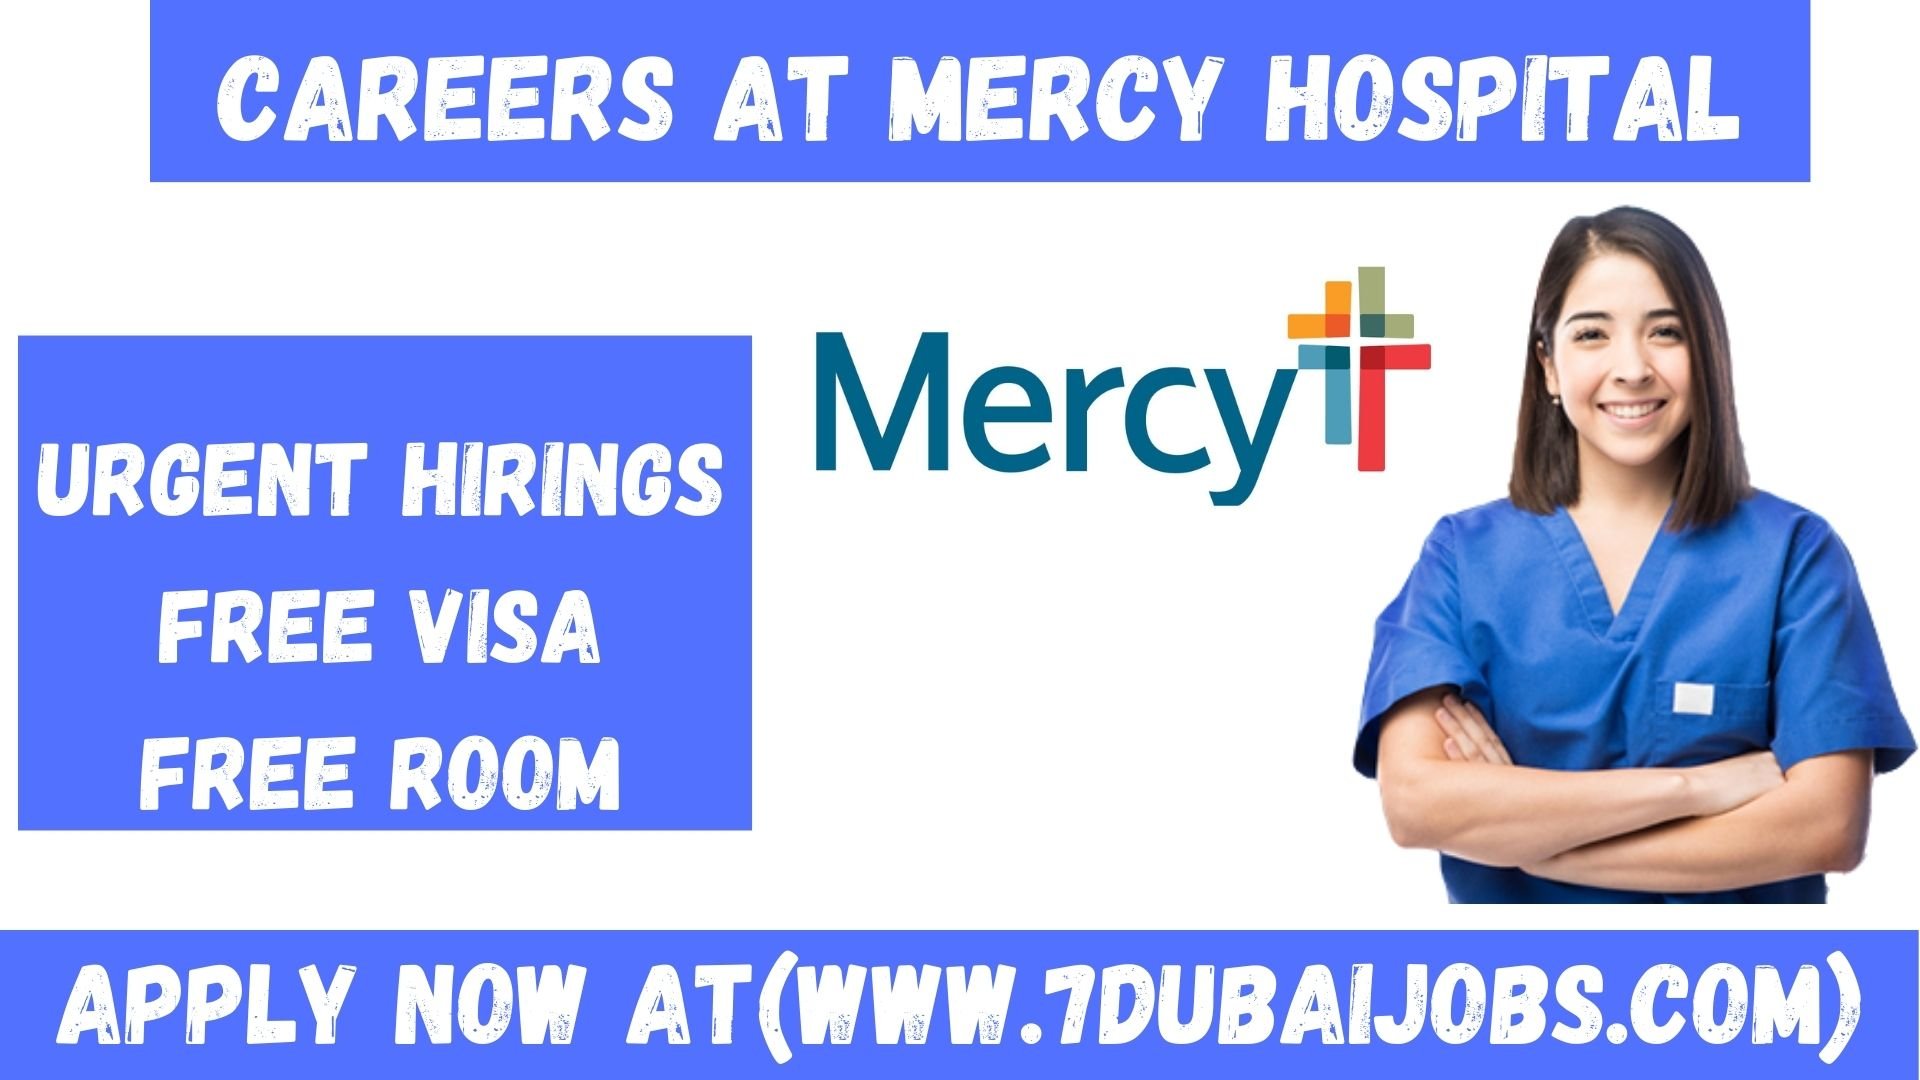 Careers at Mercy Hospital